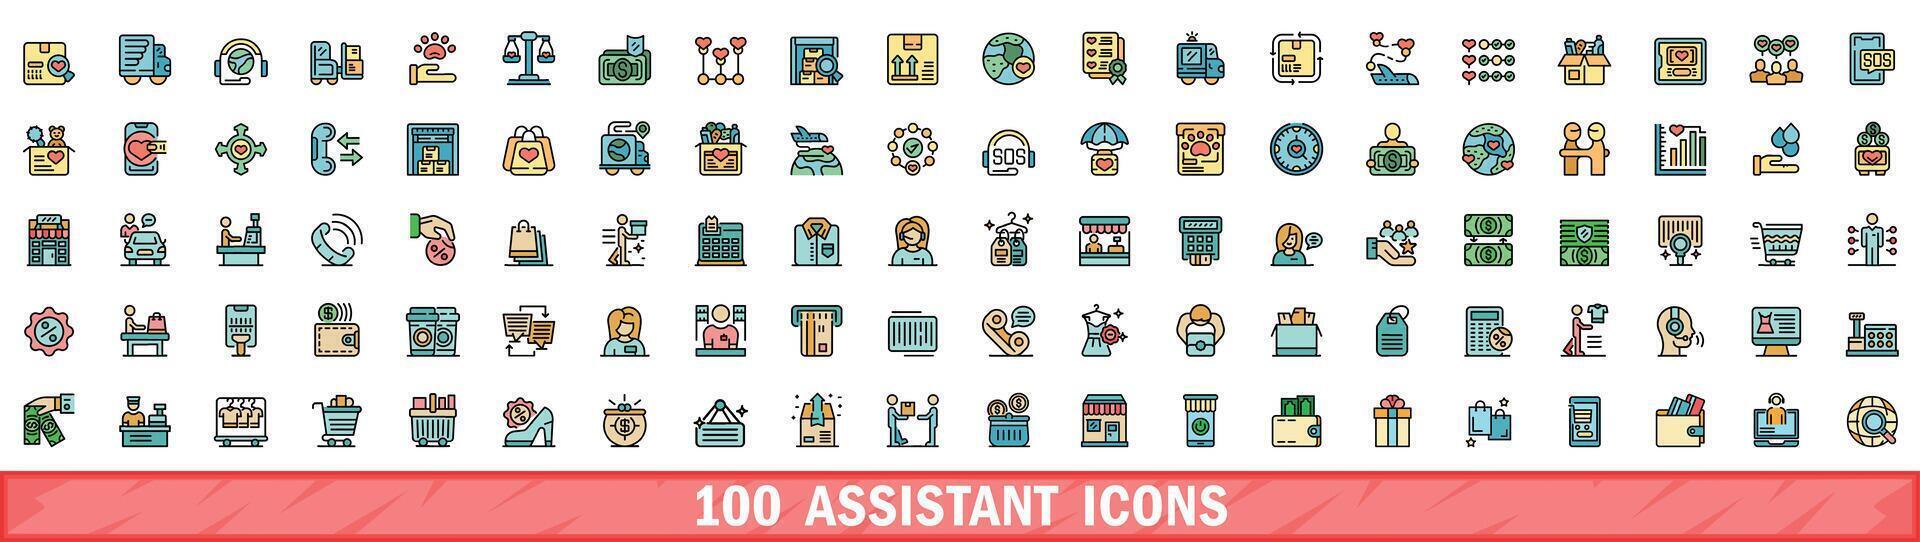 100 assistant icons set, color line style vector